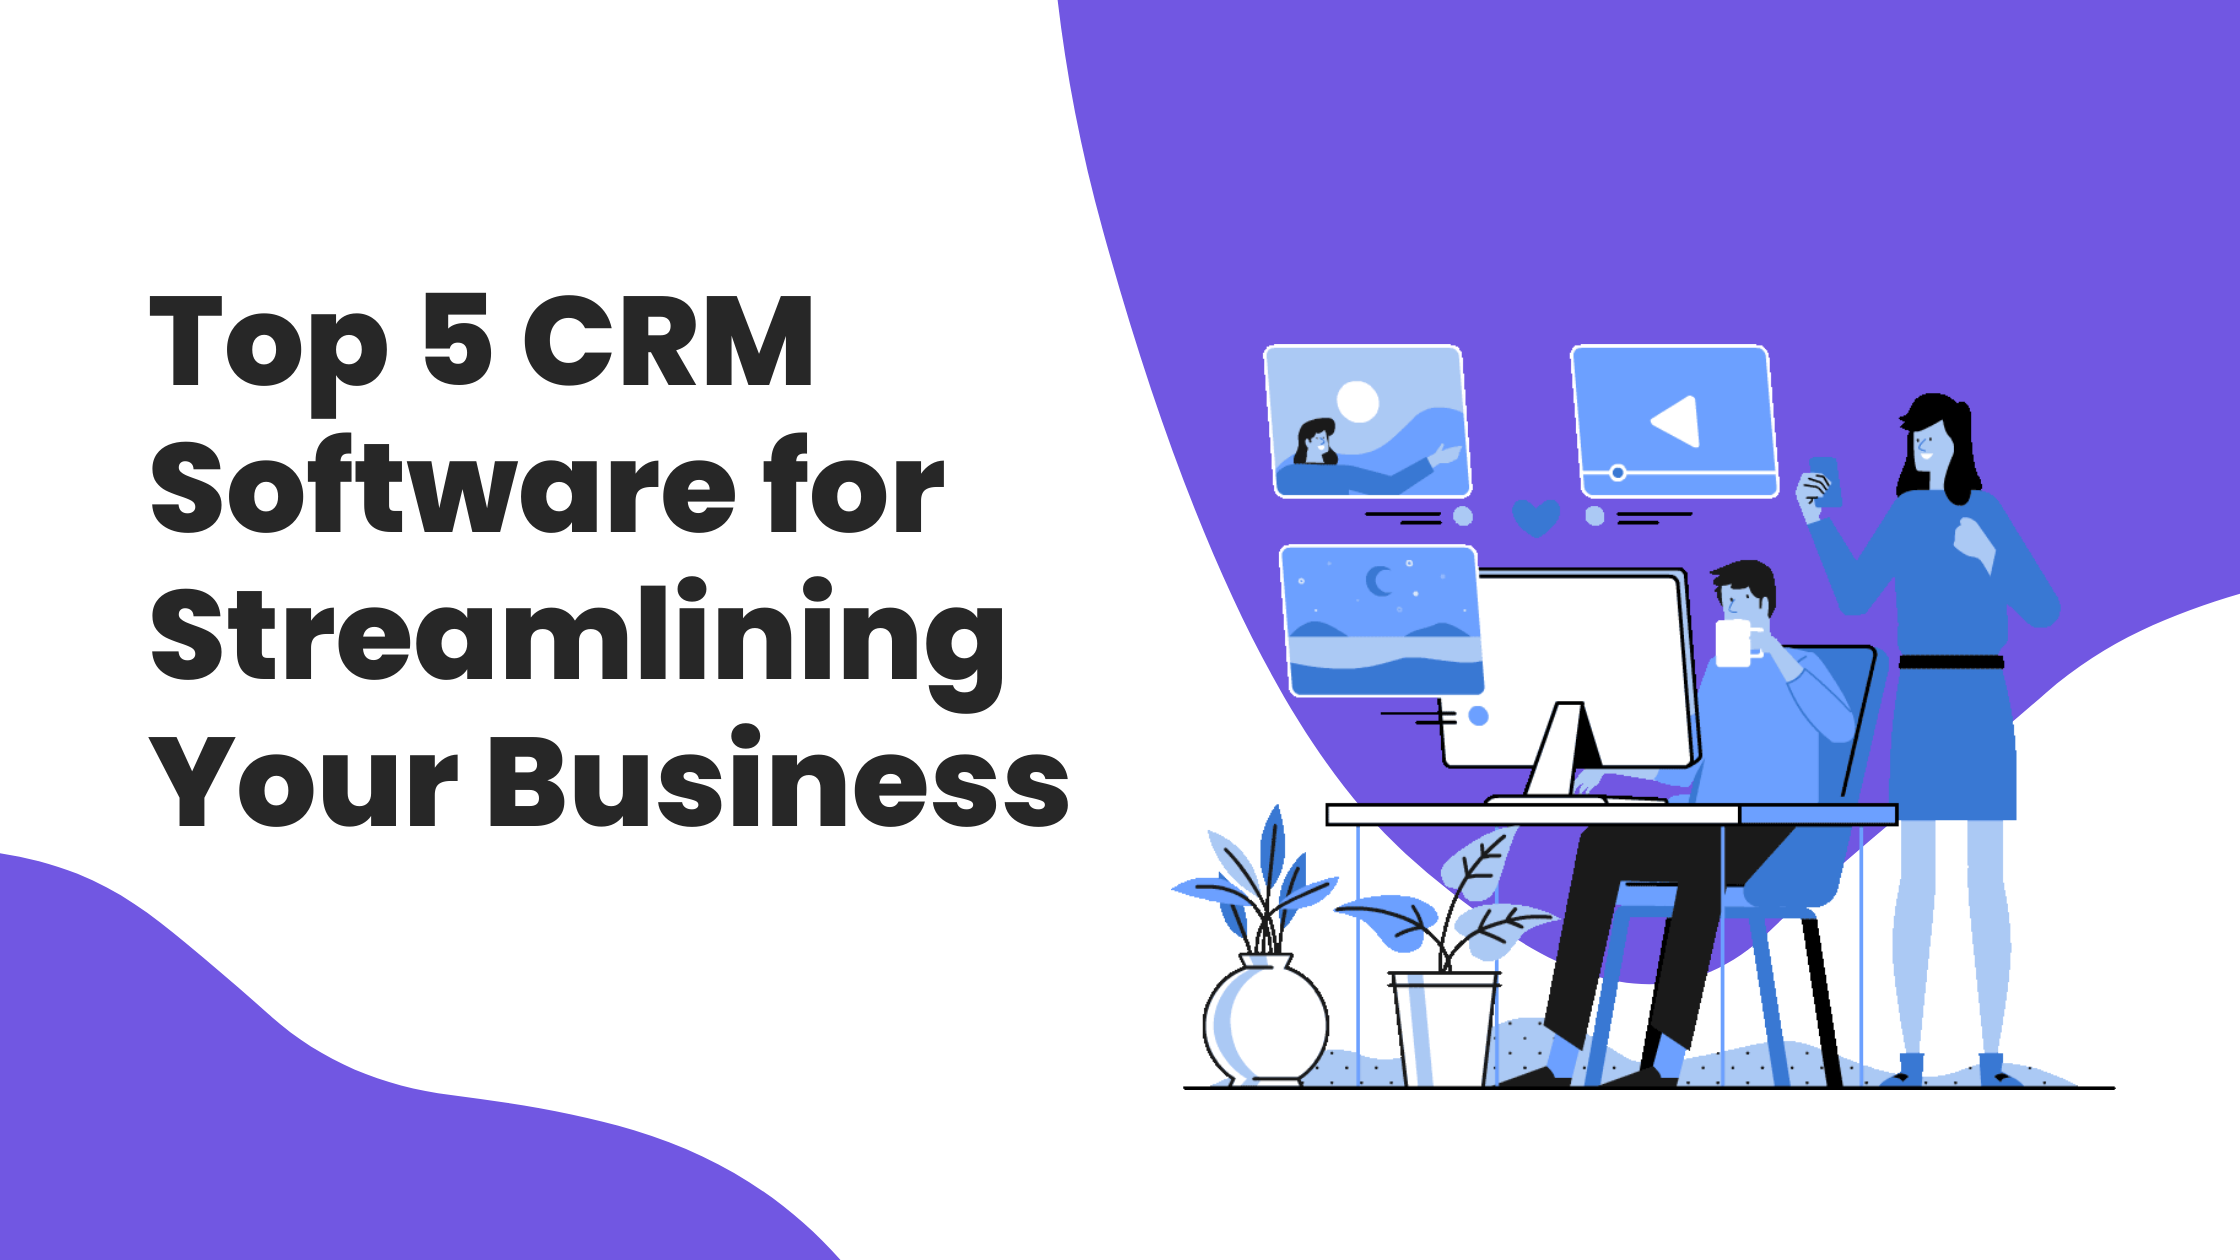 Top 5 CRM Software for Streamlining Your Business